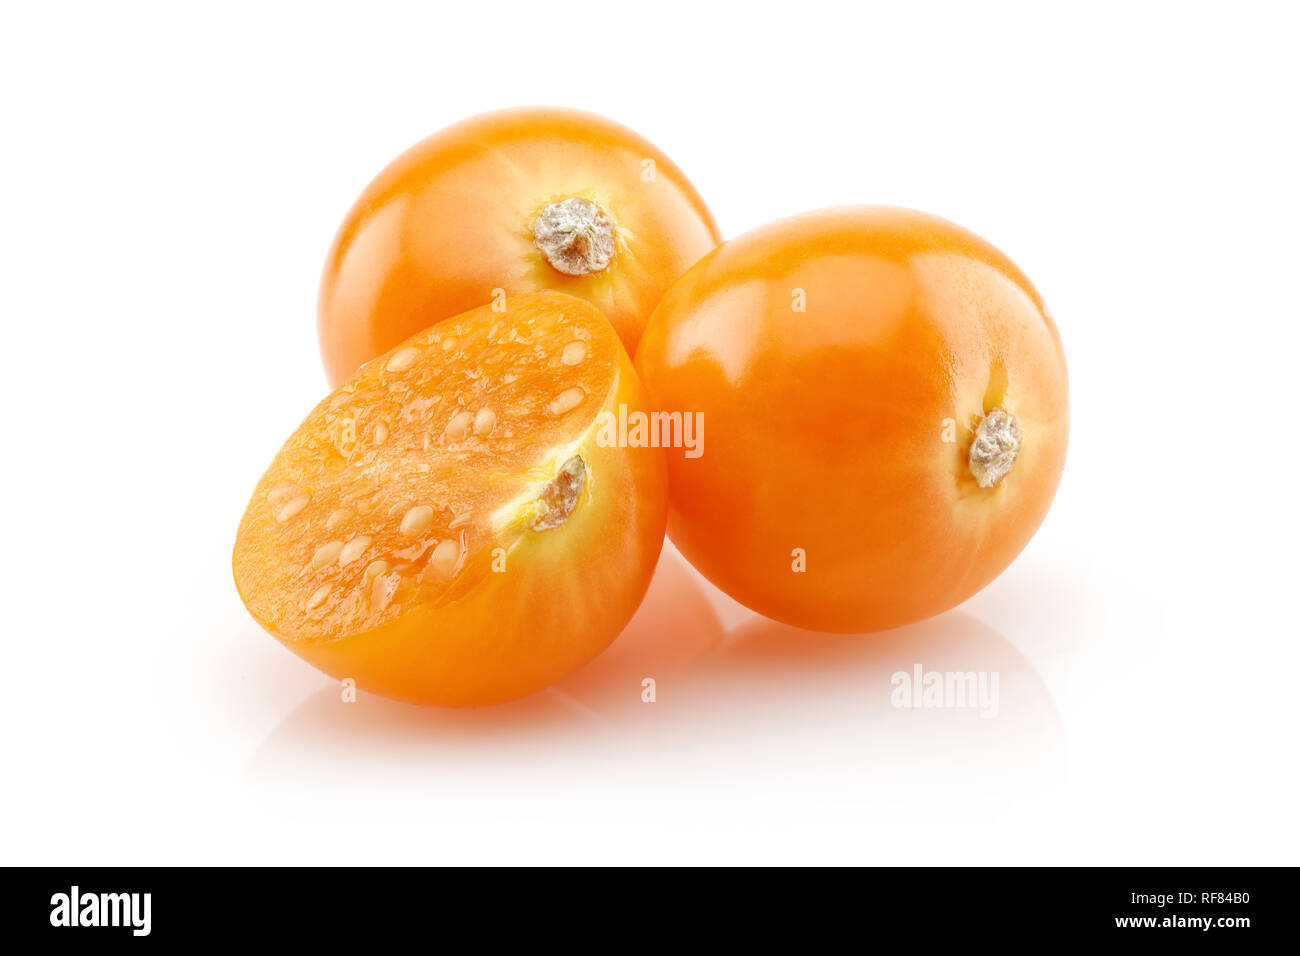 Physalis fruit or golden berry isolated on white background Stock Photo